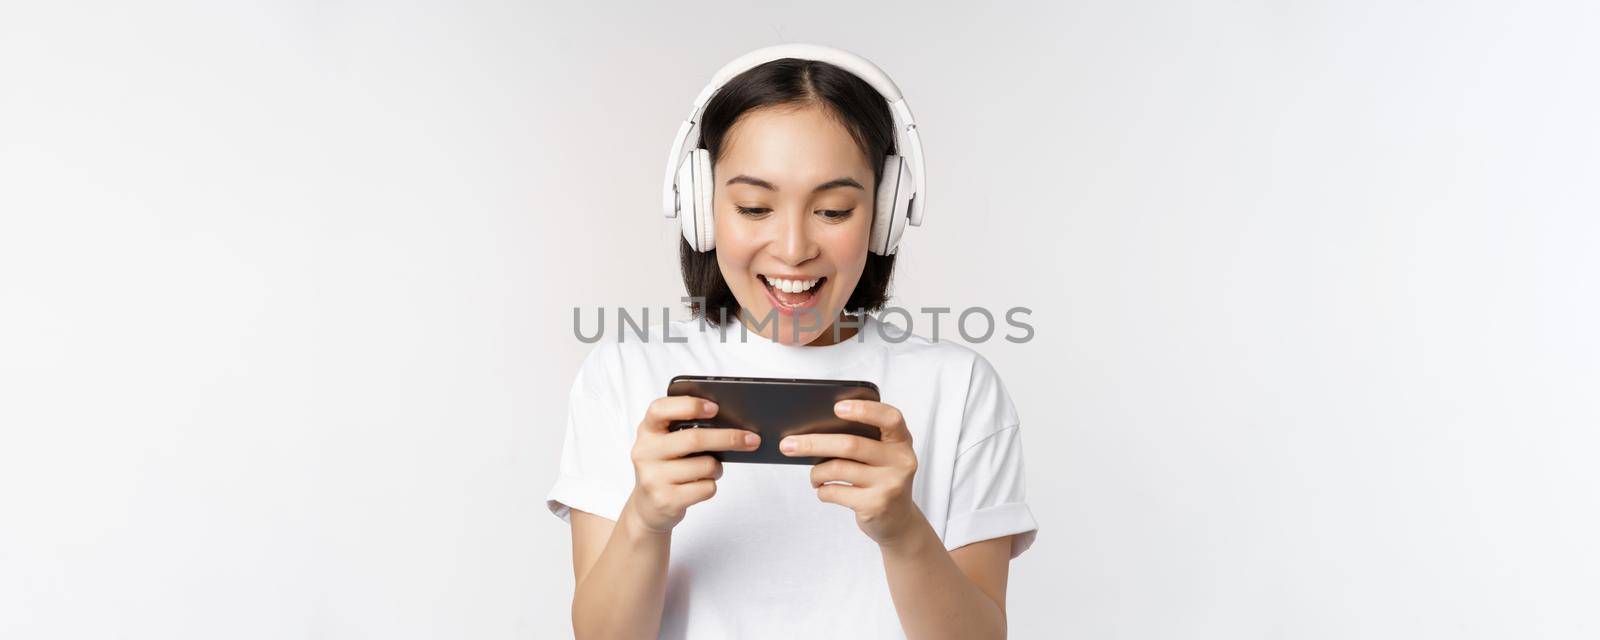 Happy asian woman in headphones, looking at smartphone, watching video on mobile phone and smiling, standing over white background.